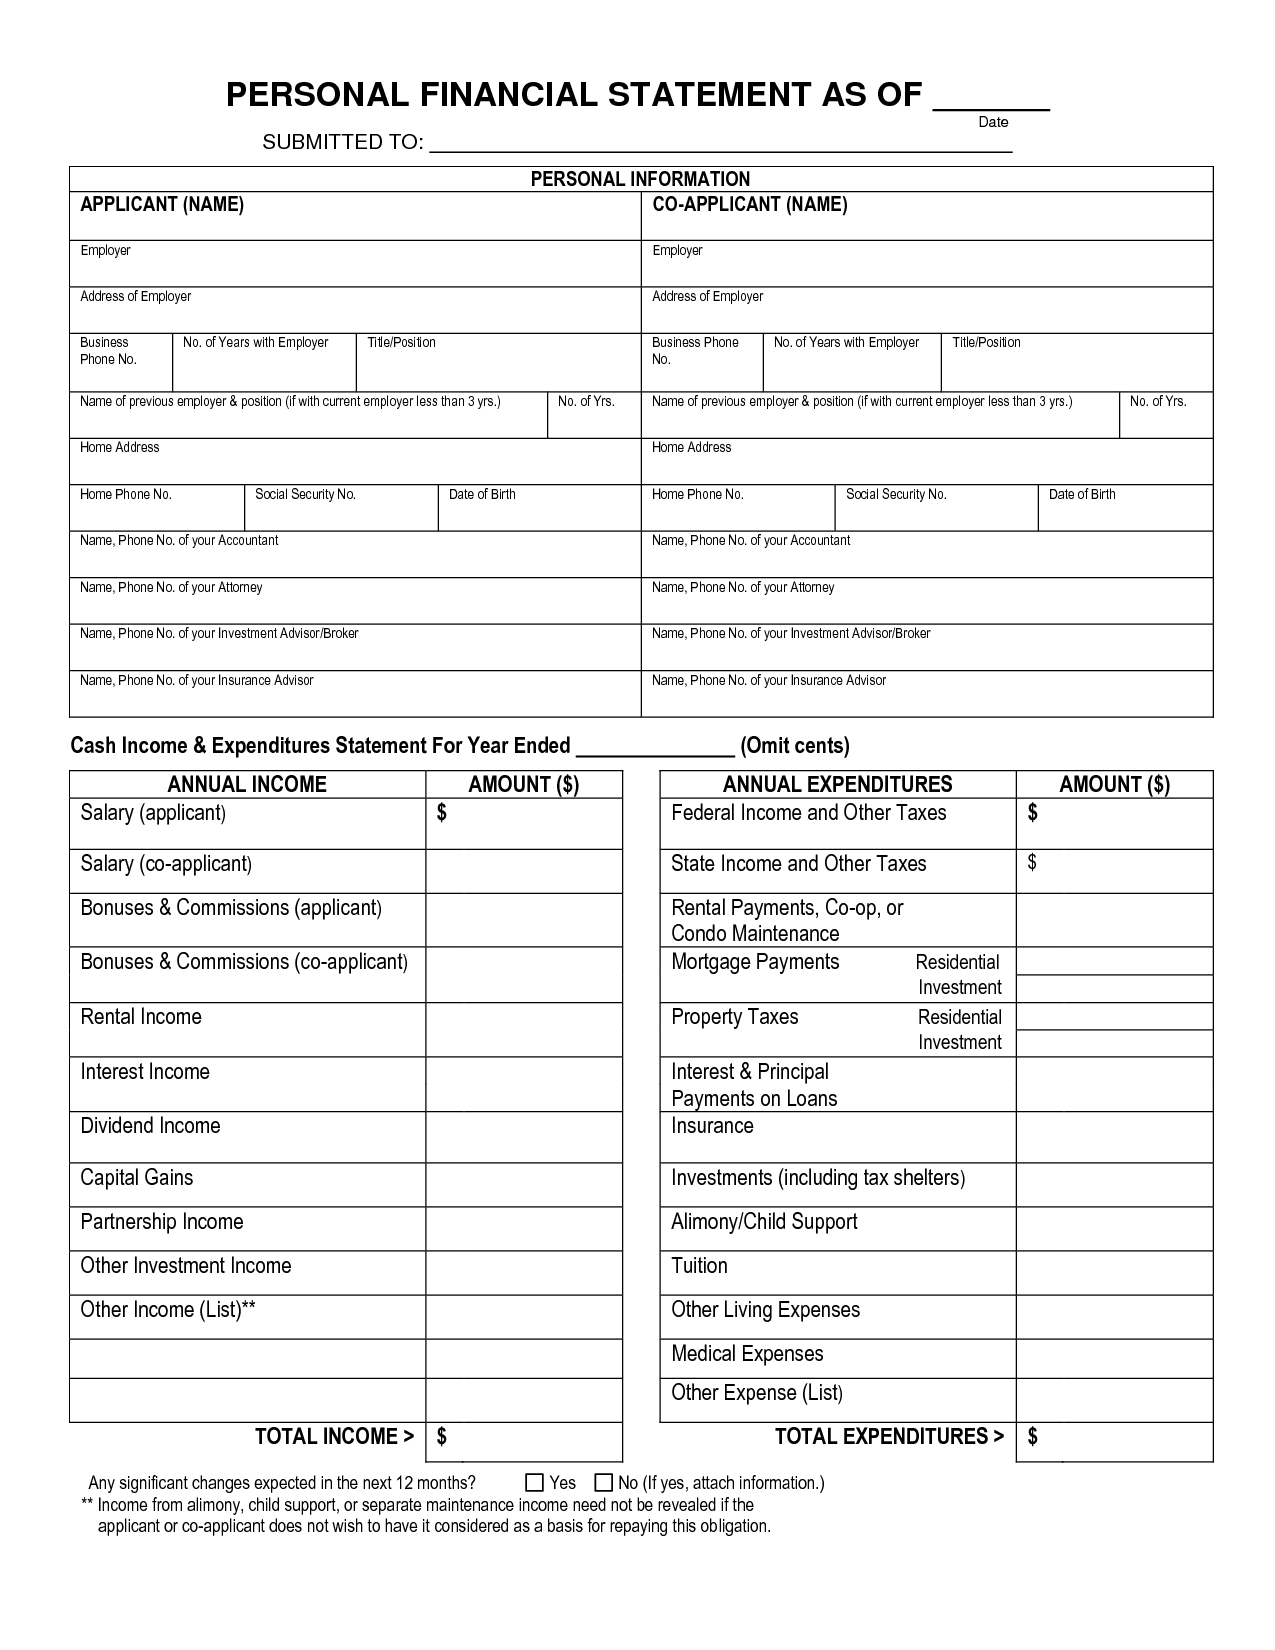 Free Printable Personal Financial Statement | Blank Personal Pertaining To Blank Personal Financial Statement Template